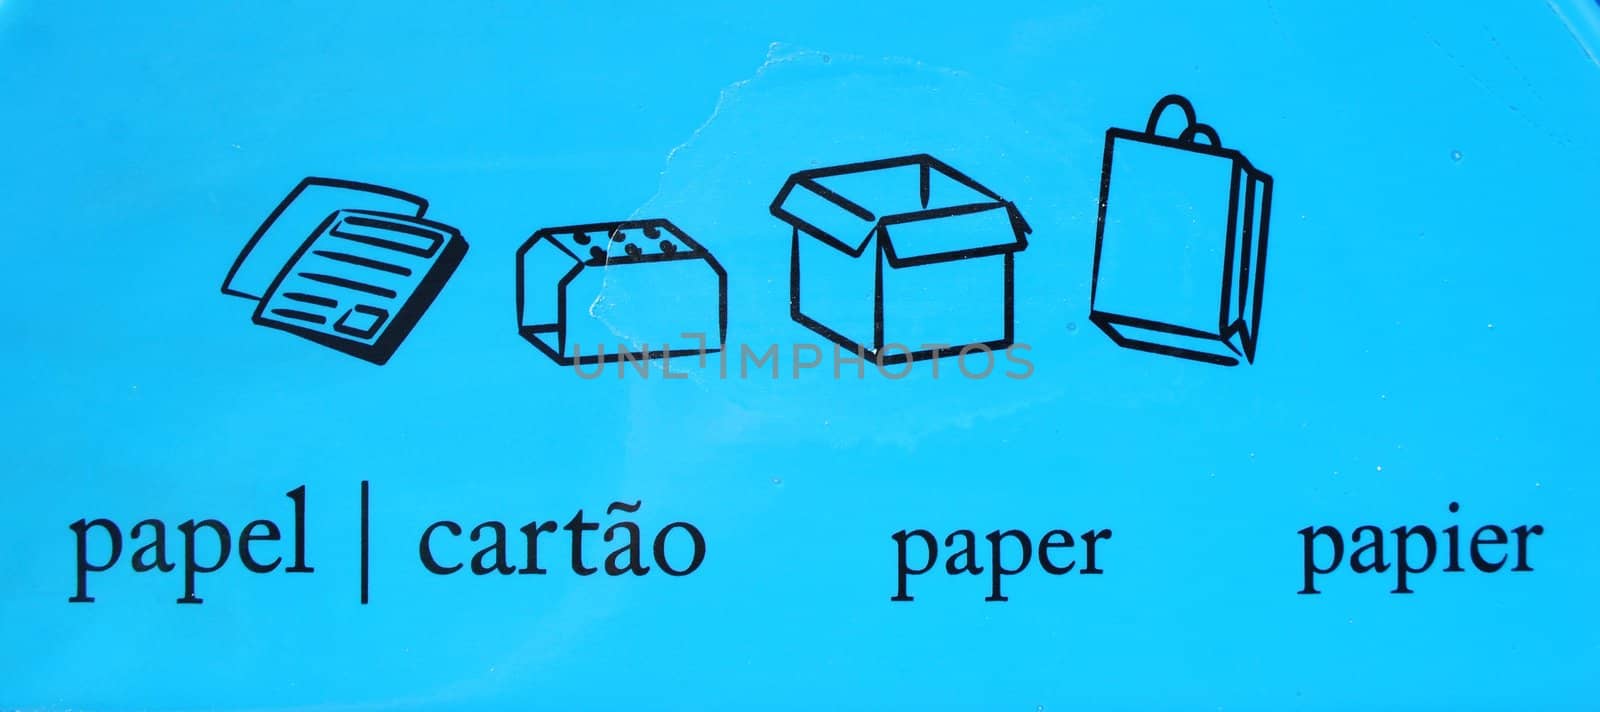 paper recycle symbols/pictures